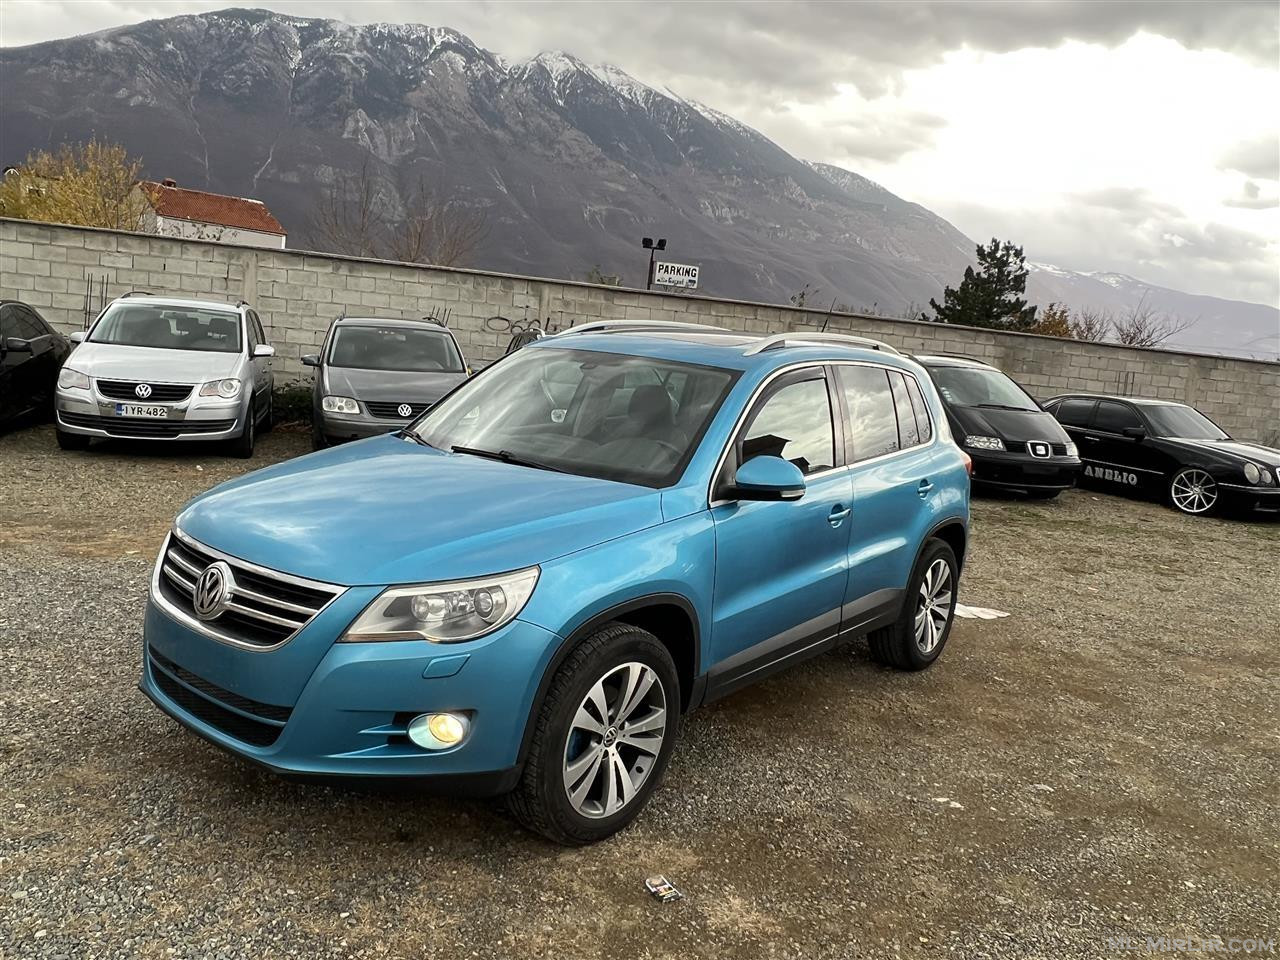 Tiguan 2.0 Automat full opsion 2008